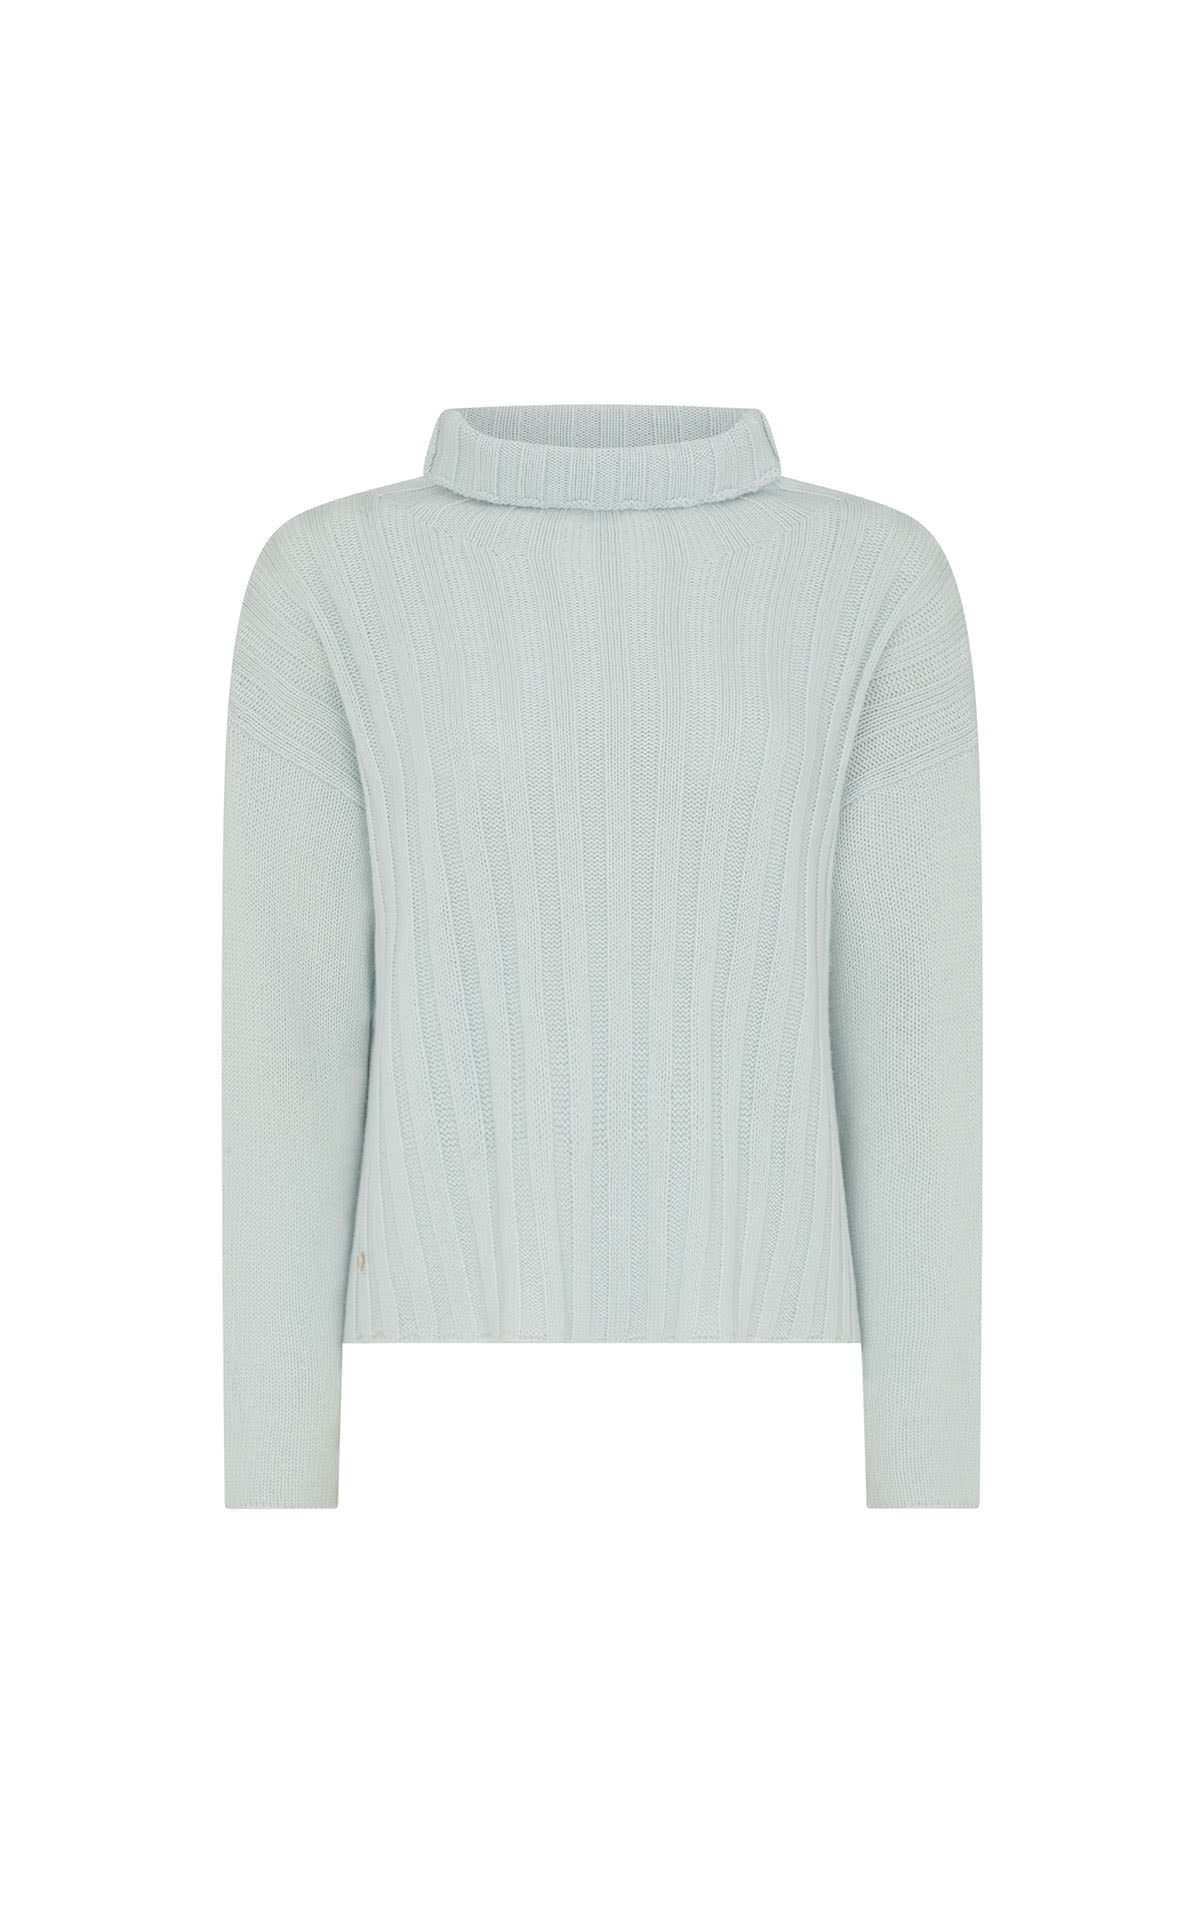 Bamford Emilia sweater from Bicester Village